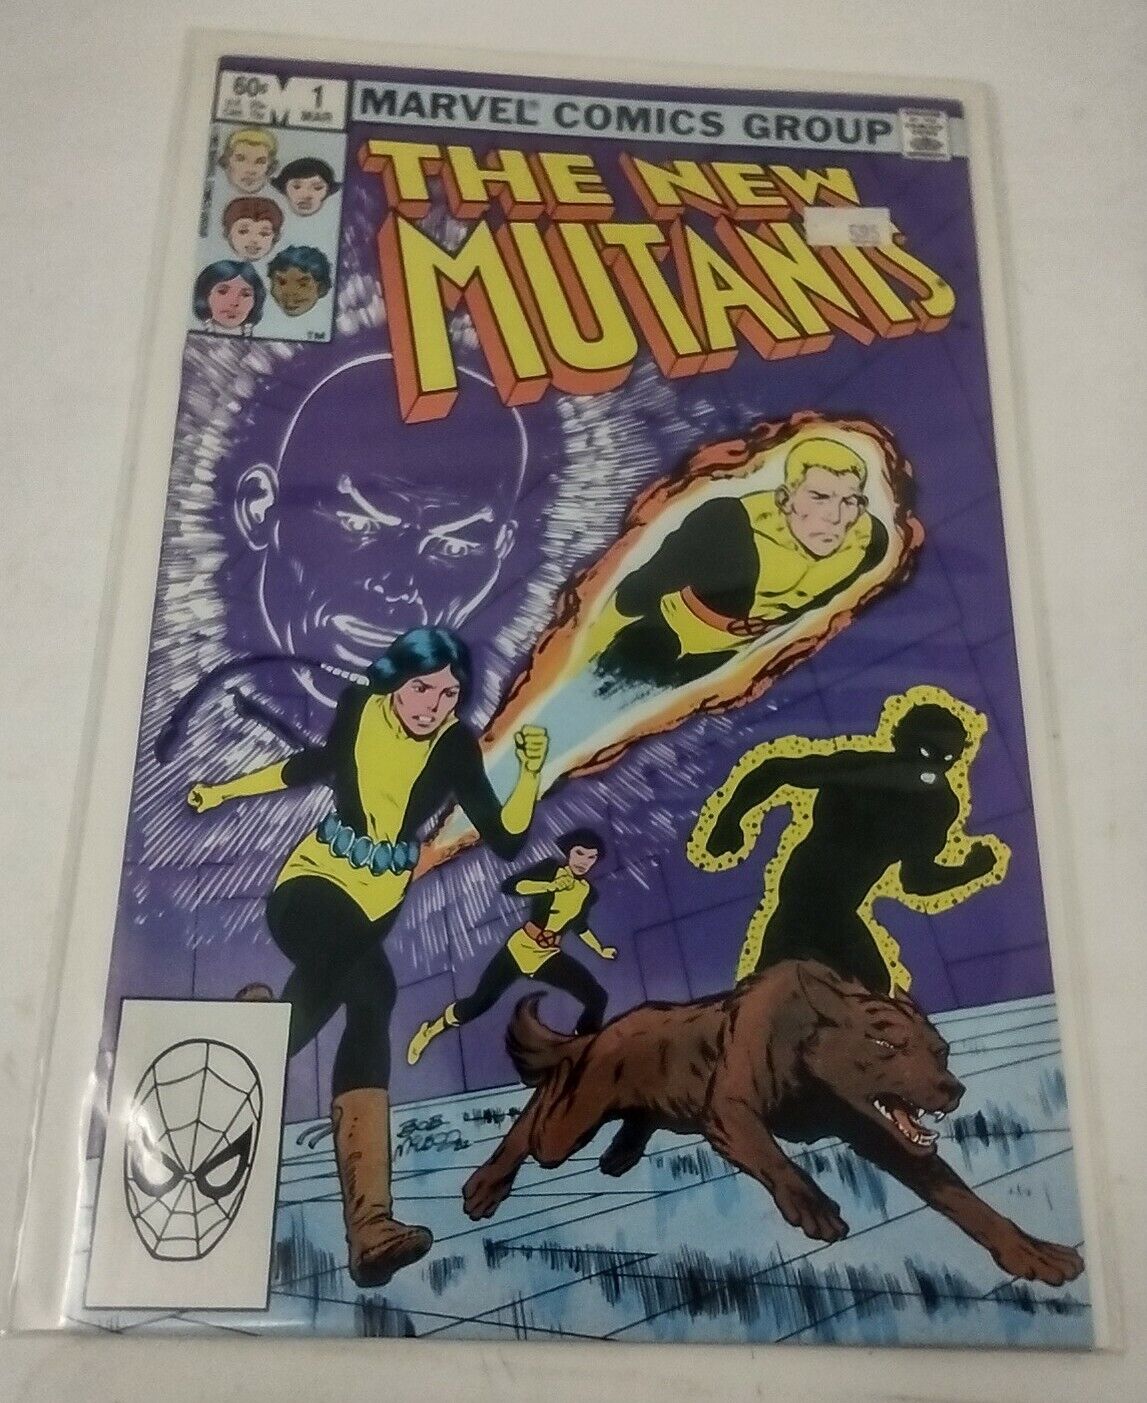 The New Mutants #1 Vintage Marvel Comics High Grade Combined Shipping